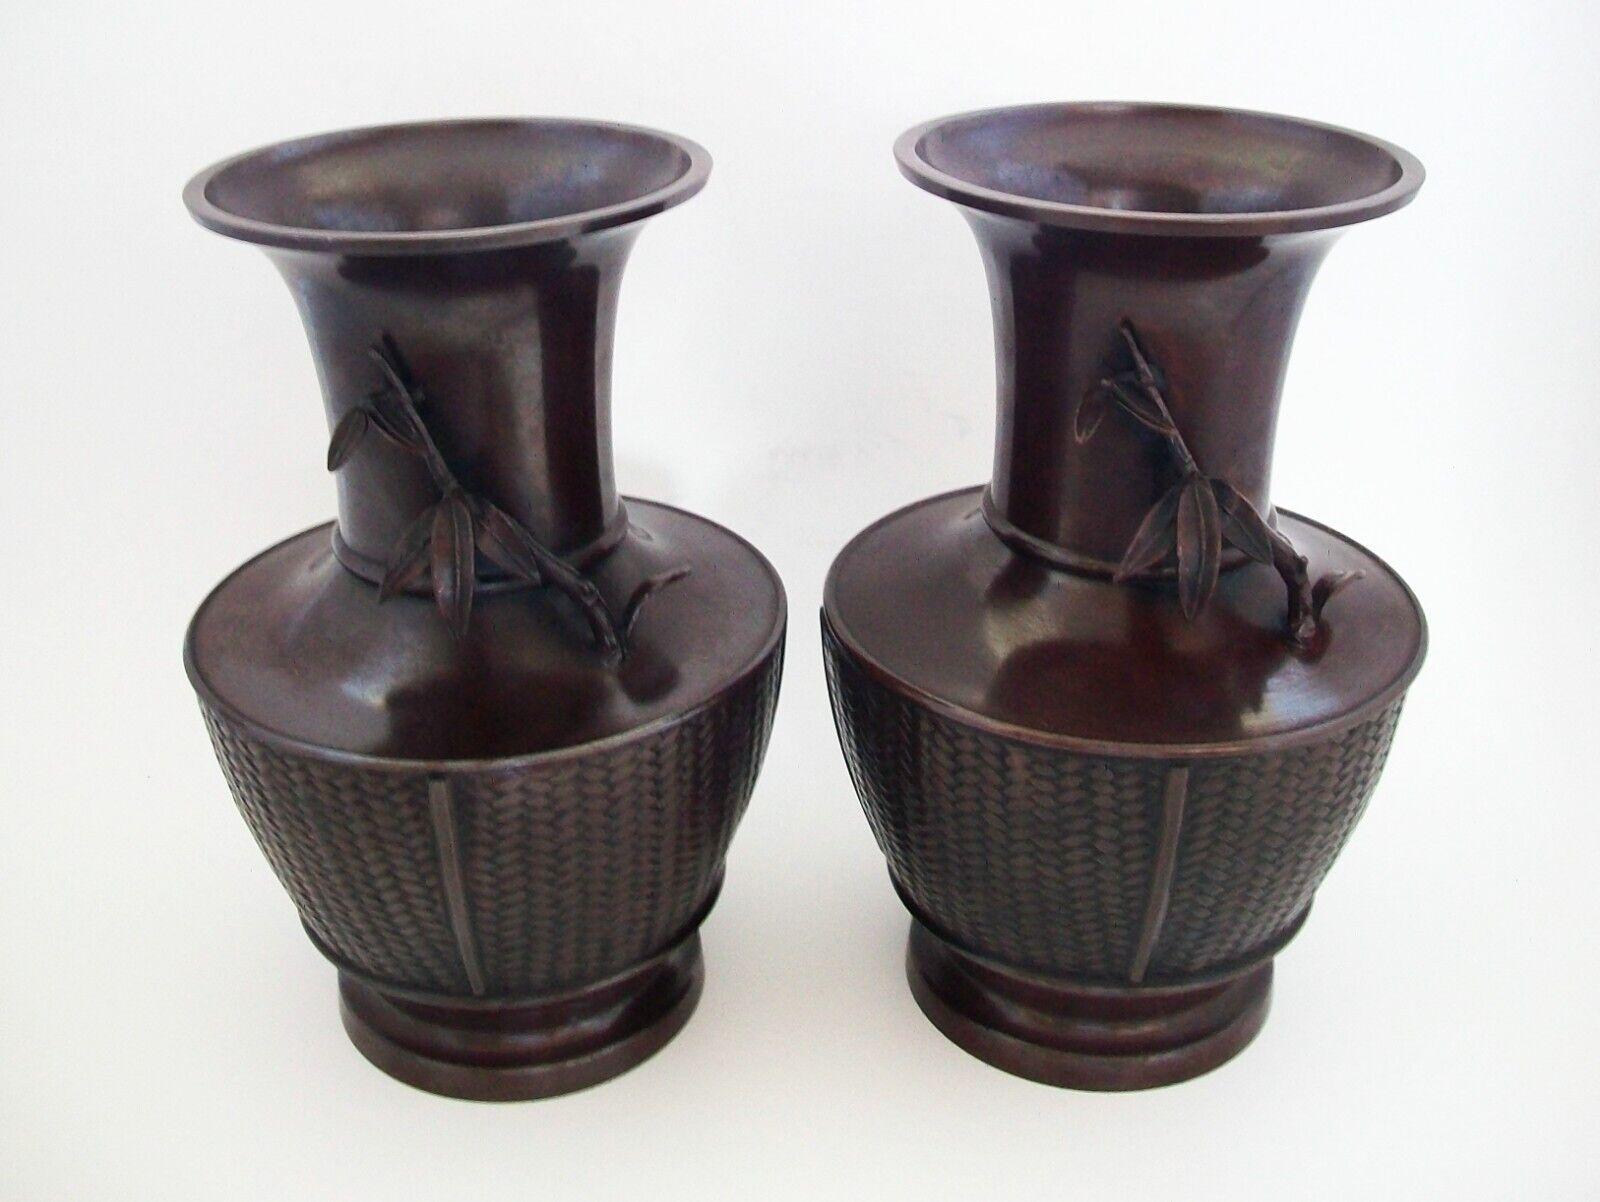 Vintage pair of fine Asian bronze vases - featuring basket weave panels to the lower body and applied 'bamboo branches with leaves' to the necks of each vase - stepped base and flaring mouth - original reddish brown finish and dark patina - each